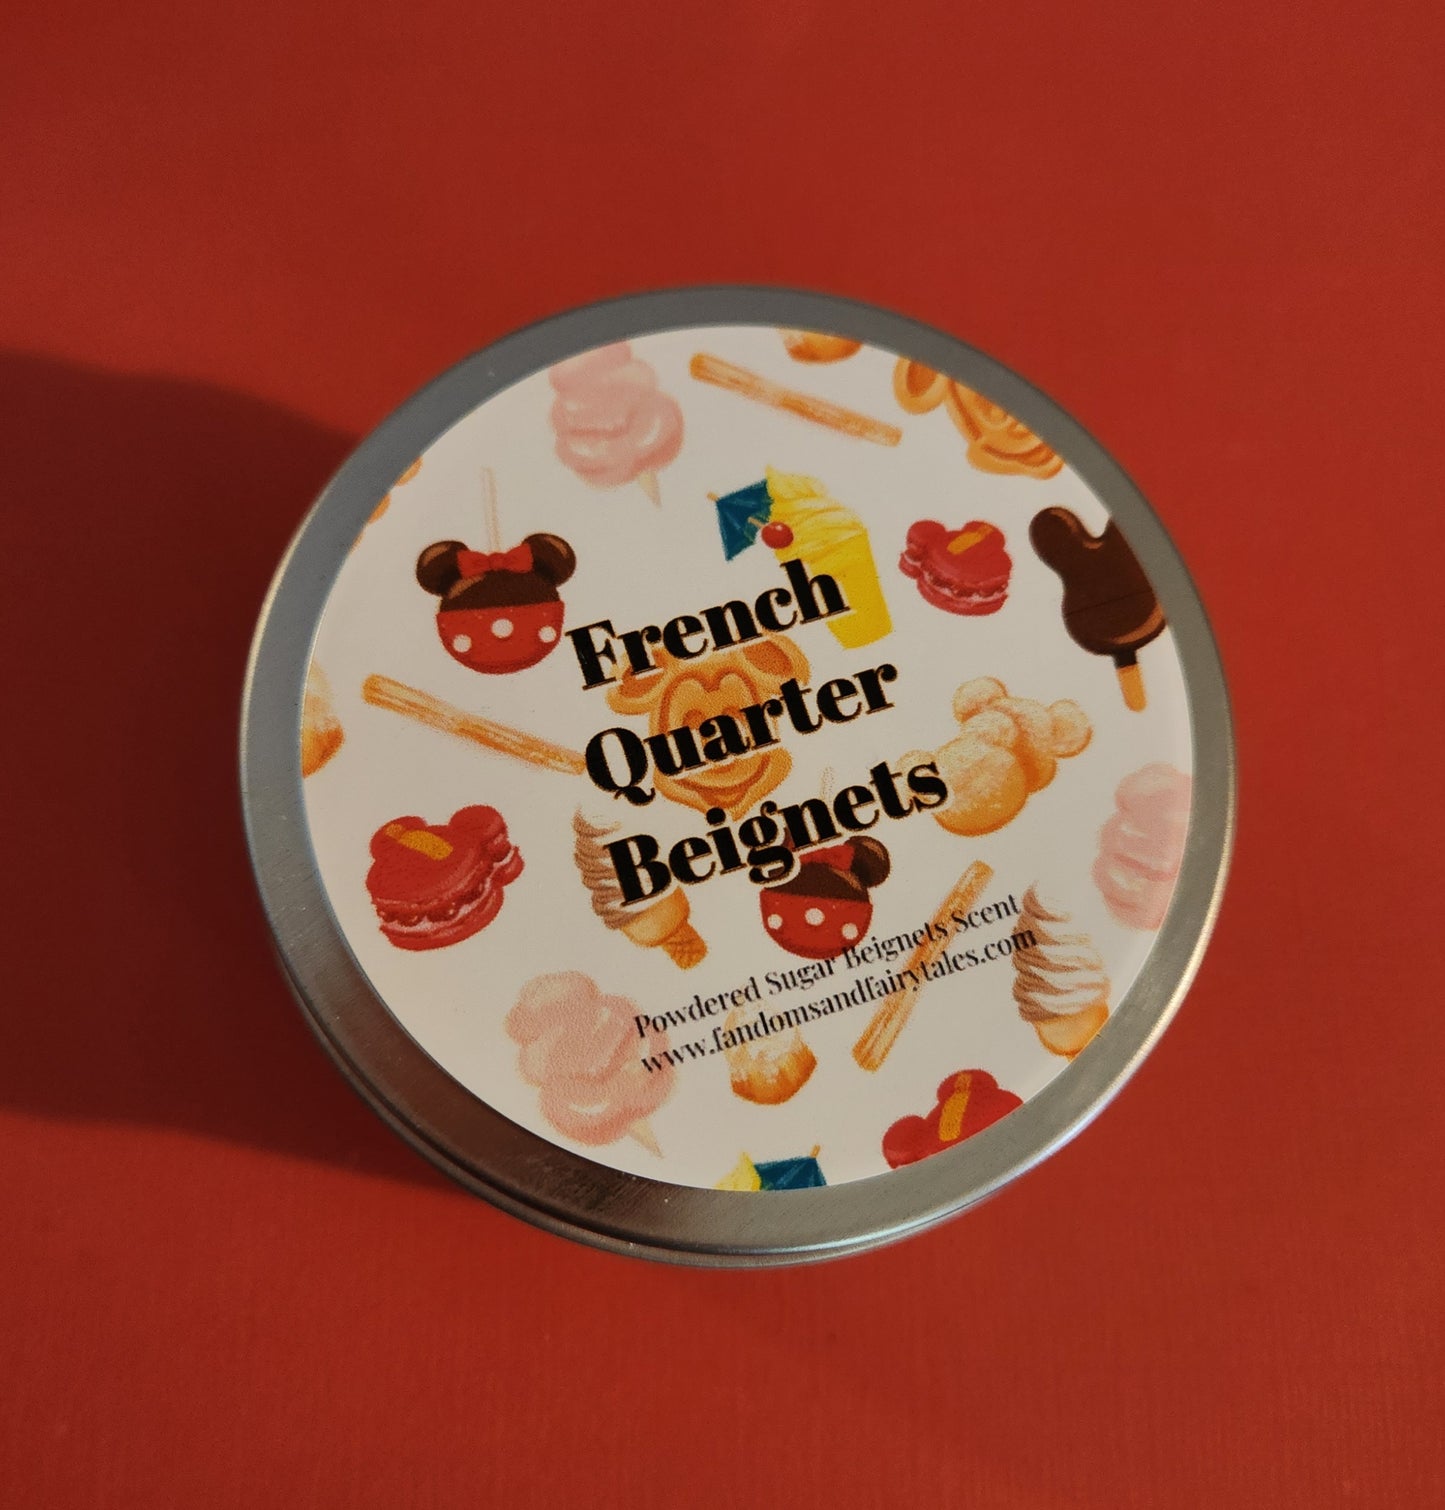 French Quarter Beignets candles, wax melts or room spray